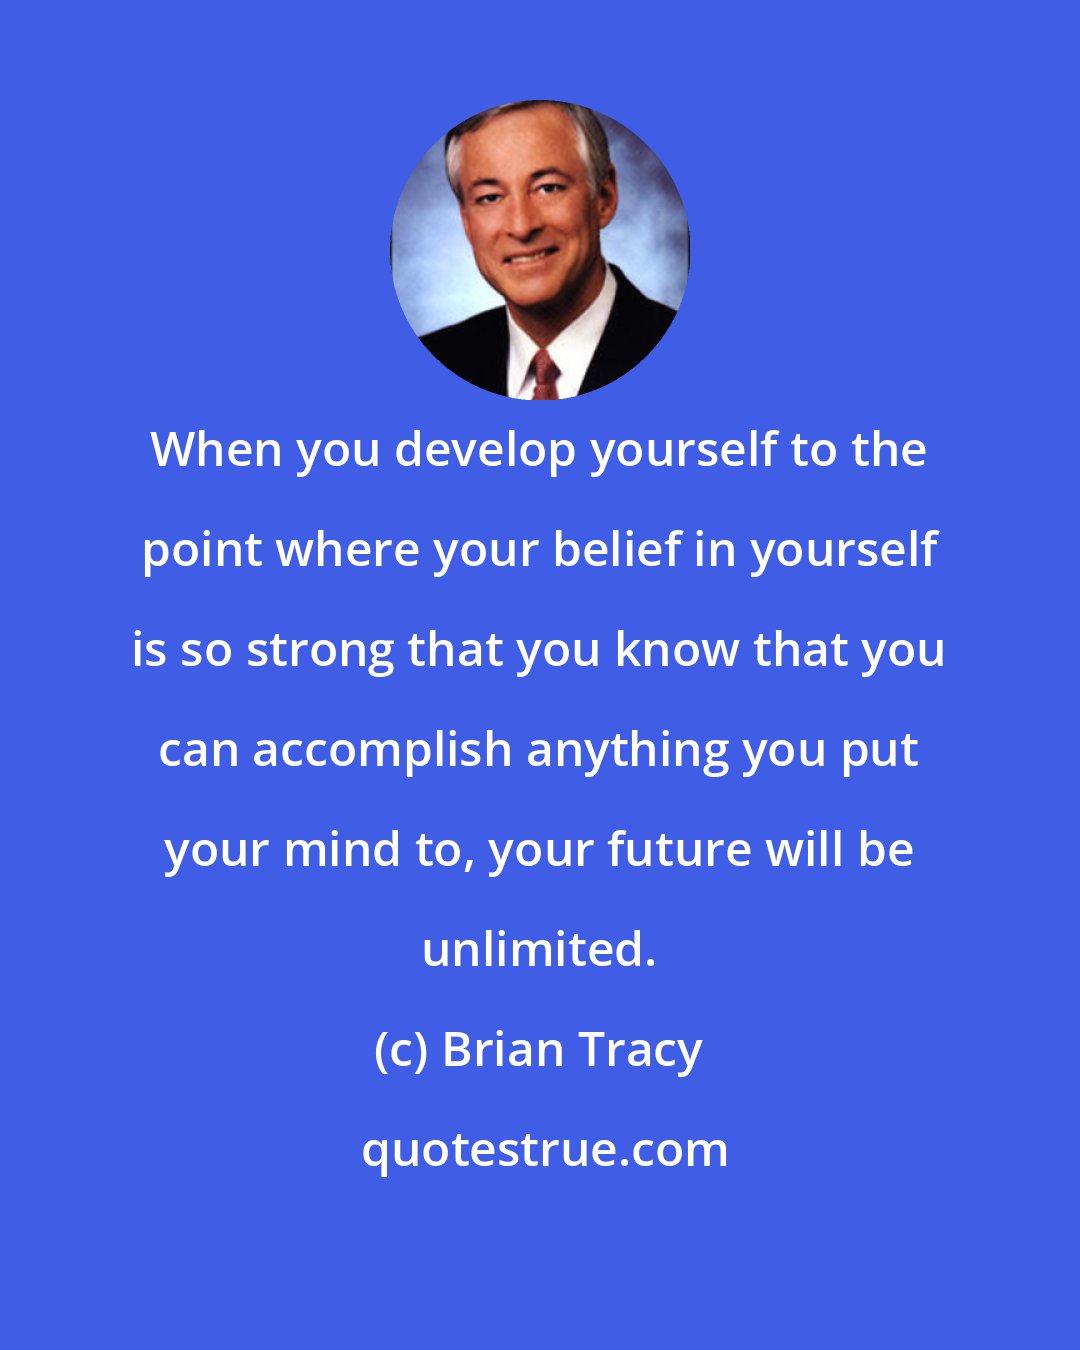 Brian Tracy: When you develop yourself to the point where your belief in yourself is so strong that you know that you can accomplish anything you put your mind to, your future will be unlimited.